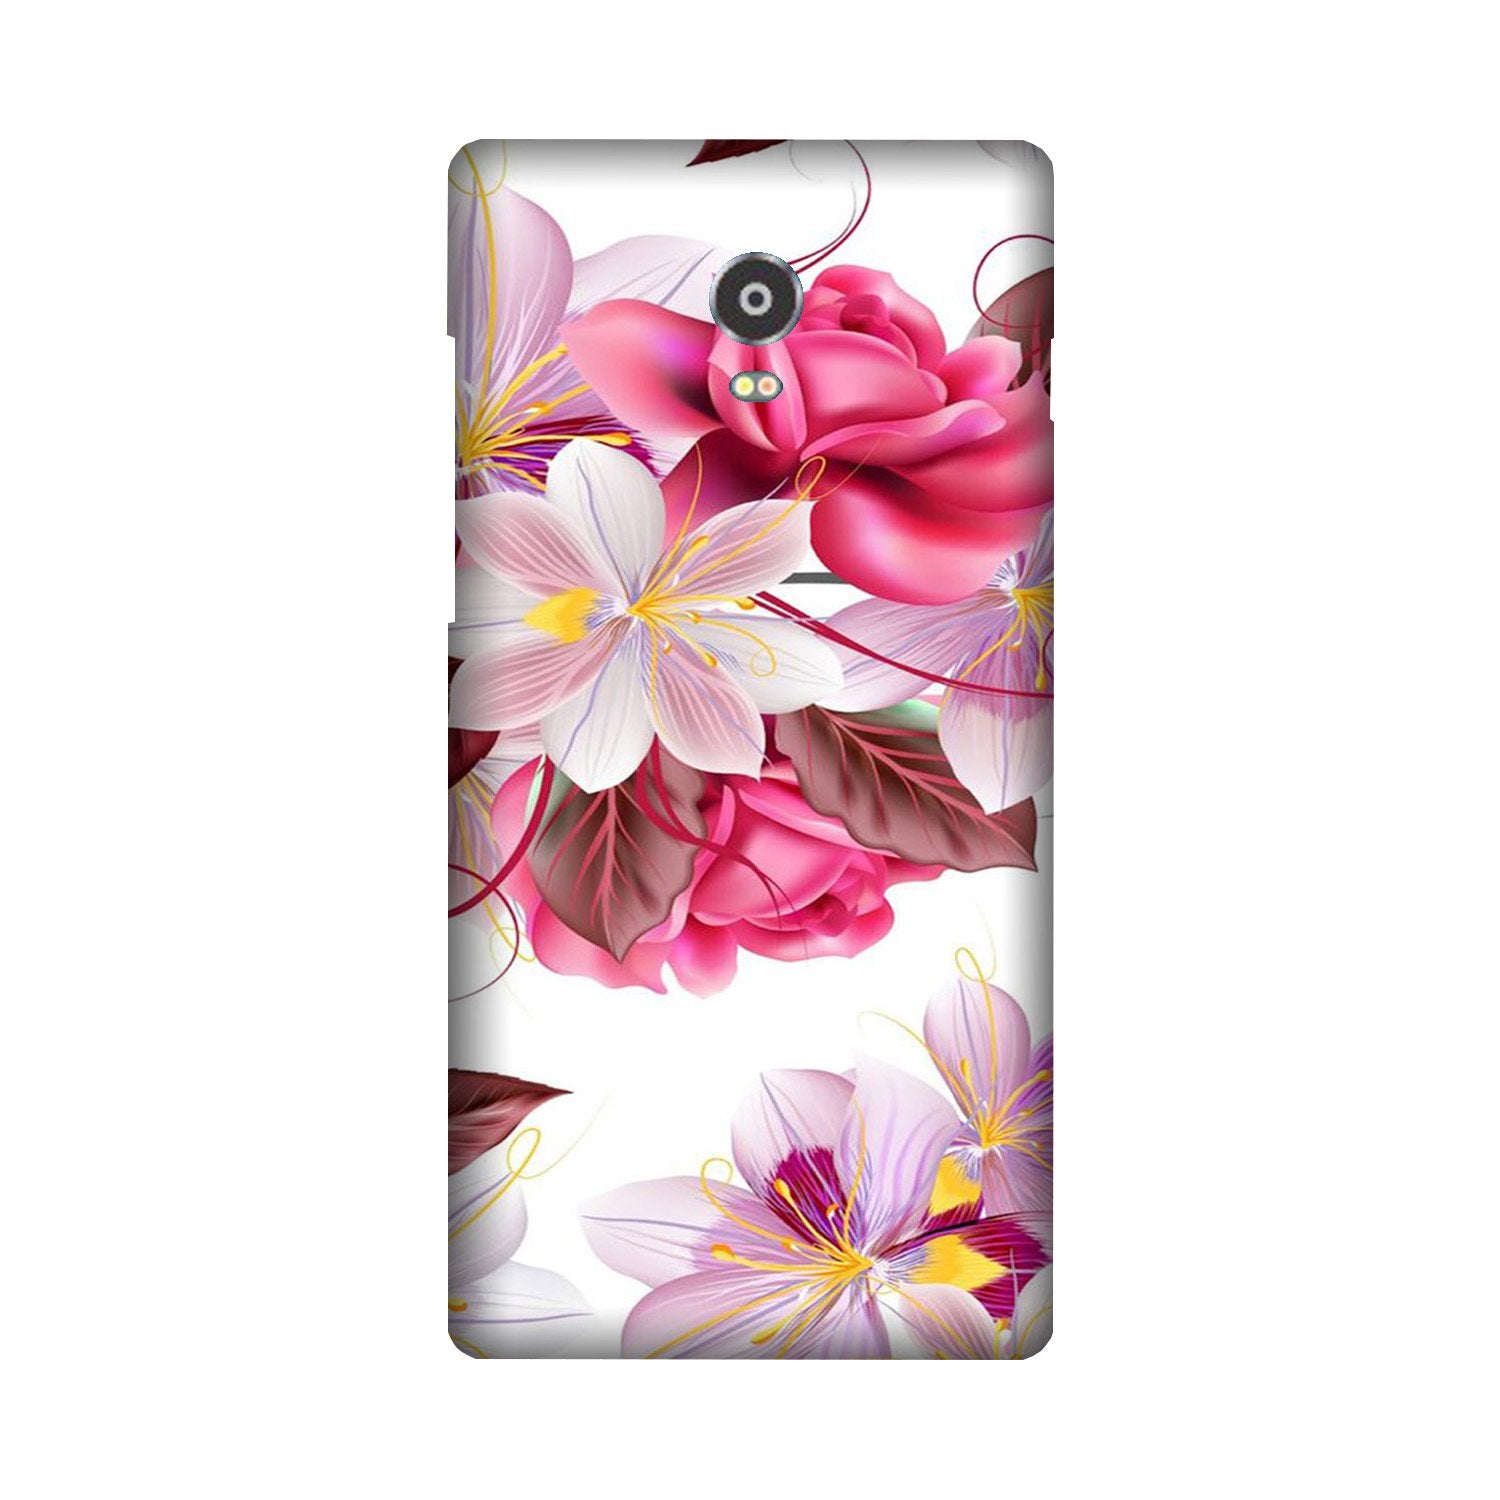 Beautiful flowers Case for Lenovo Vibe P1